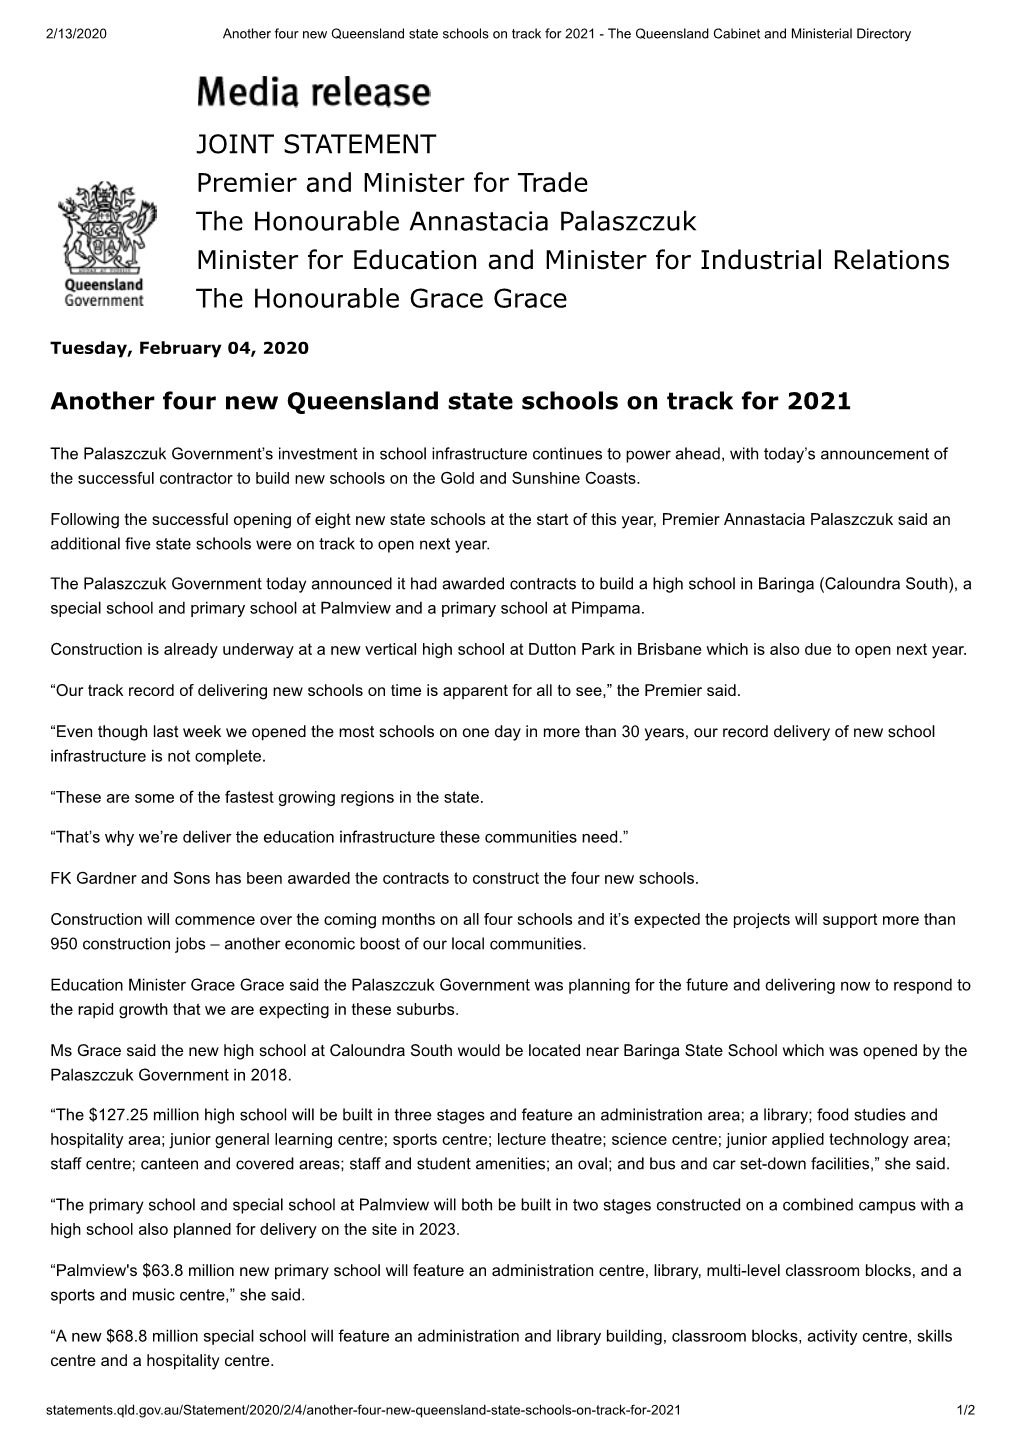 JOINT STATEMENT Premier and Minister for Trade the Honourable Annastacia Palaszczuk Minister for Education and Minister for Indu